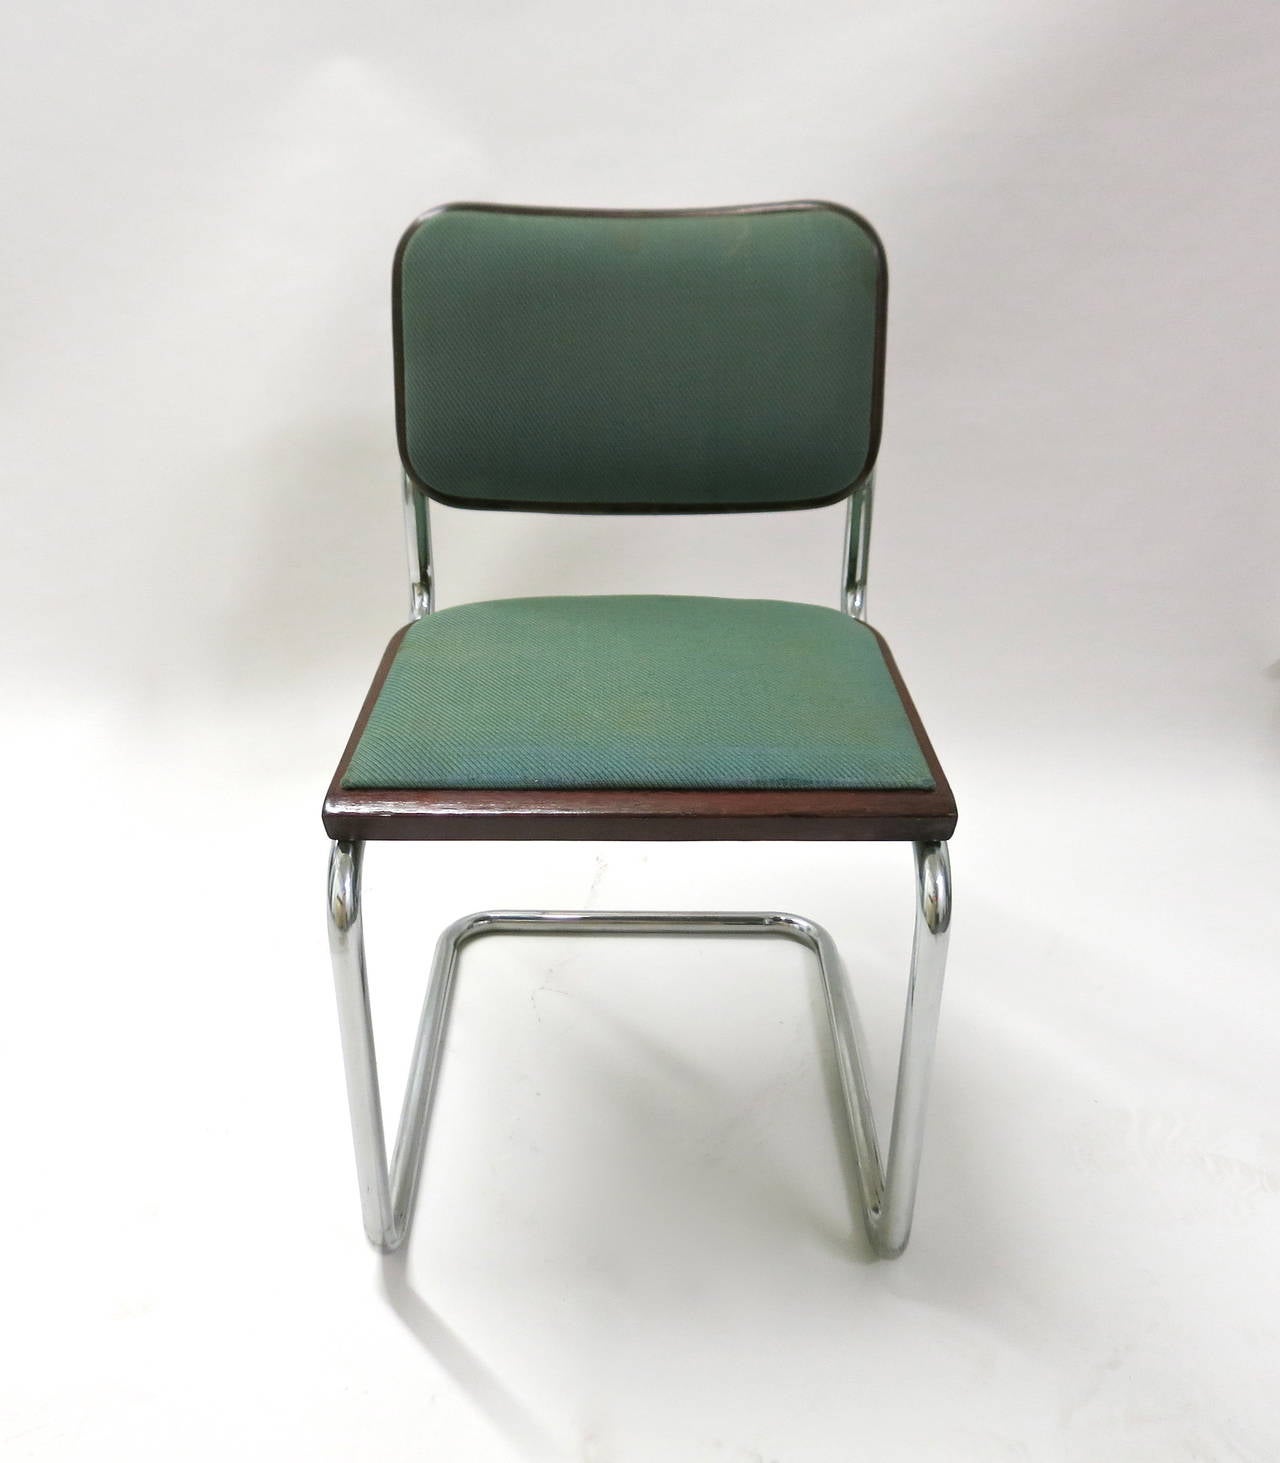 Over 100 Cesca chairs available, signed and dated, with wooden frames and upholstered seats. Original design by Marcel Breuer in 1928 for Bauhaus. All chairs produced by Knoll International in 1985, purchase for the Pacific Bell Company. Each chair